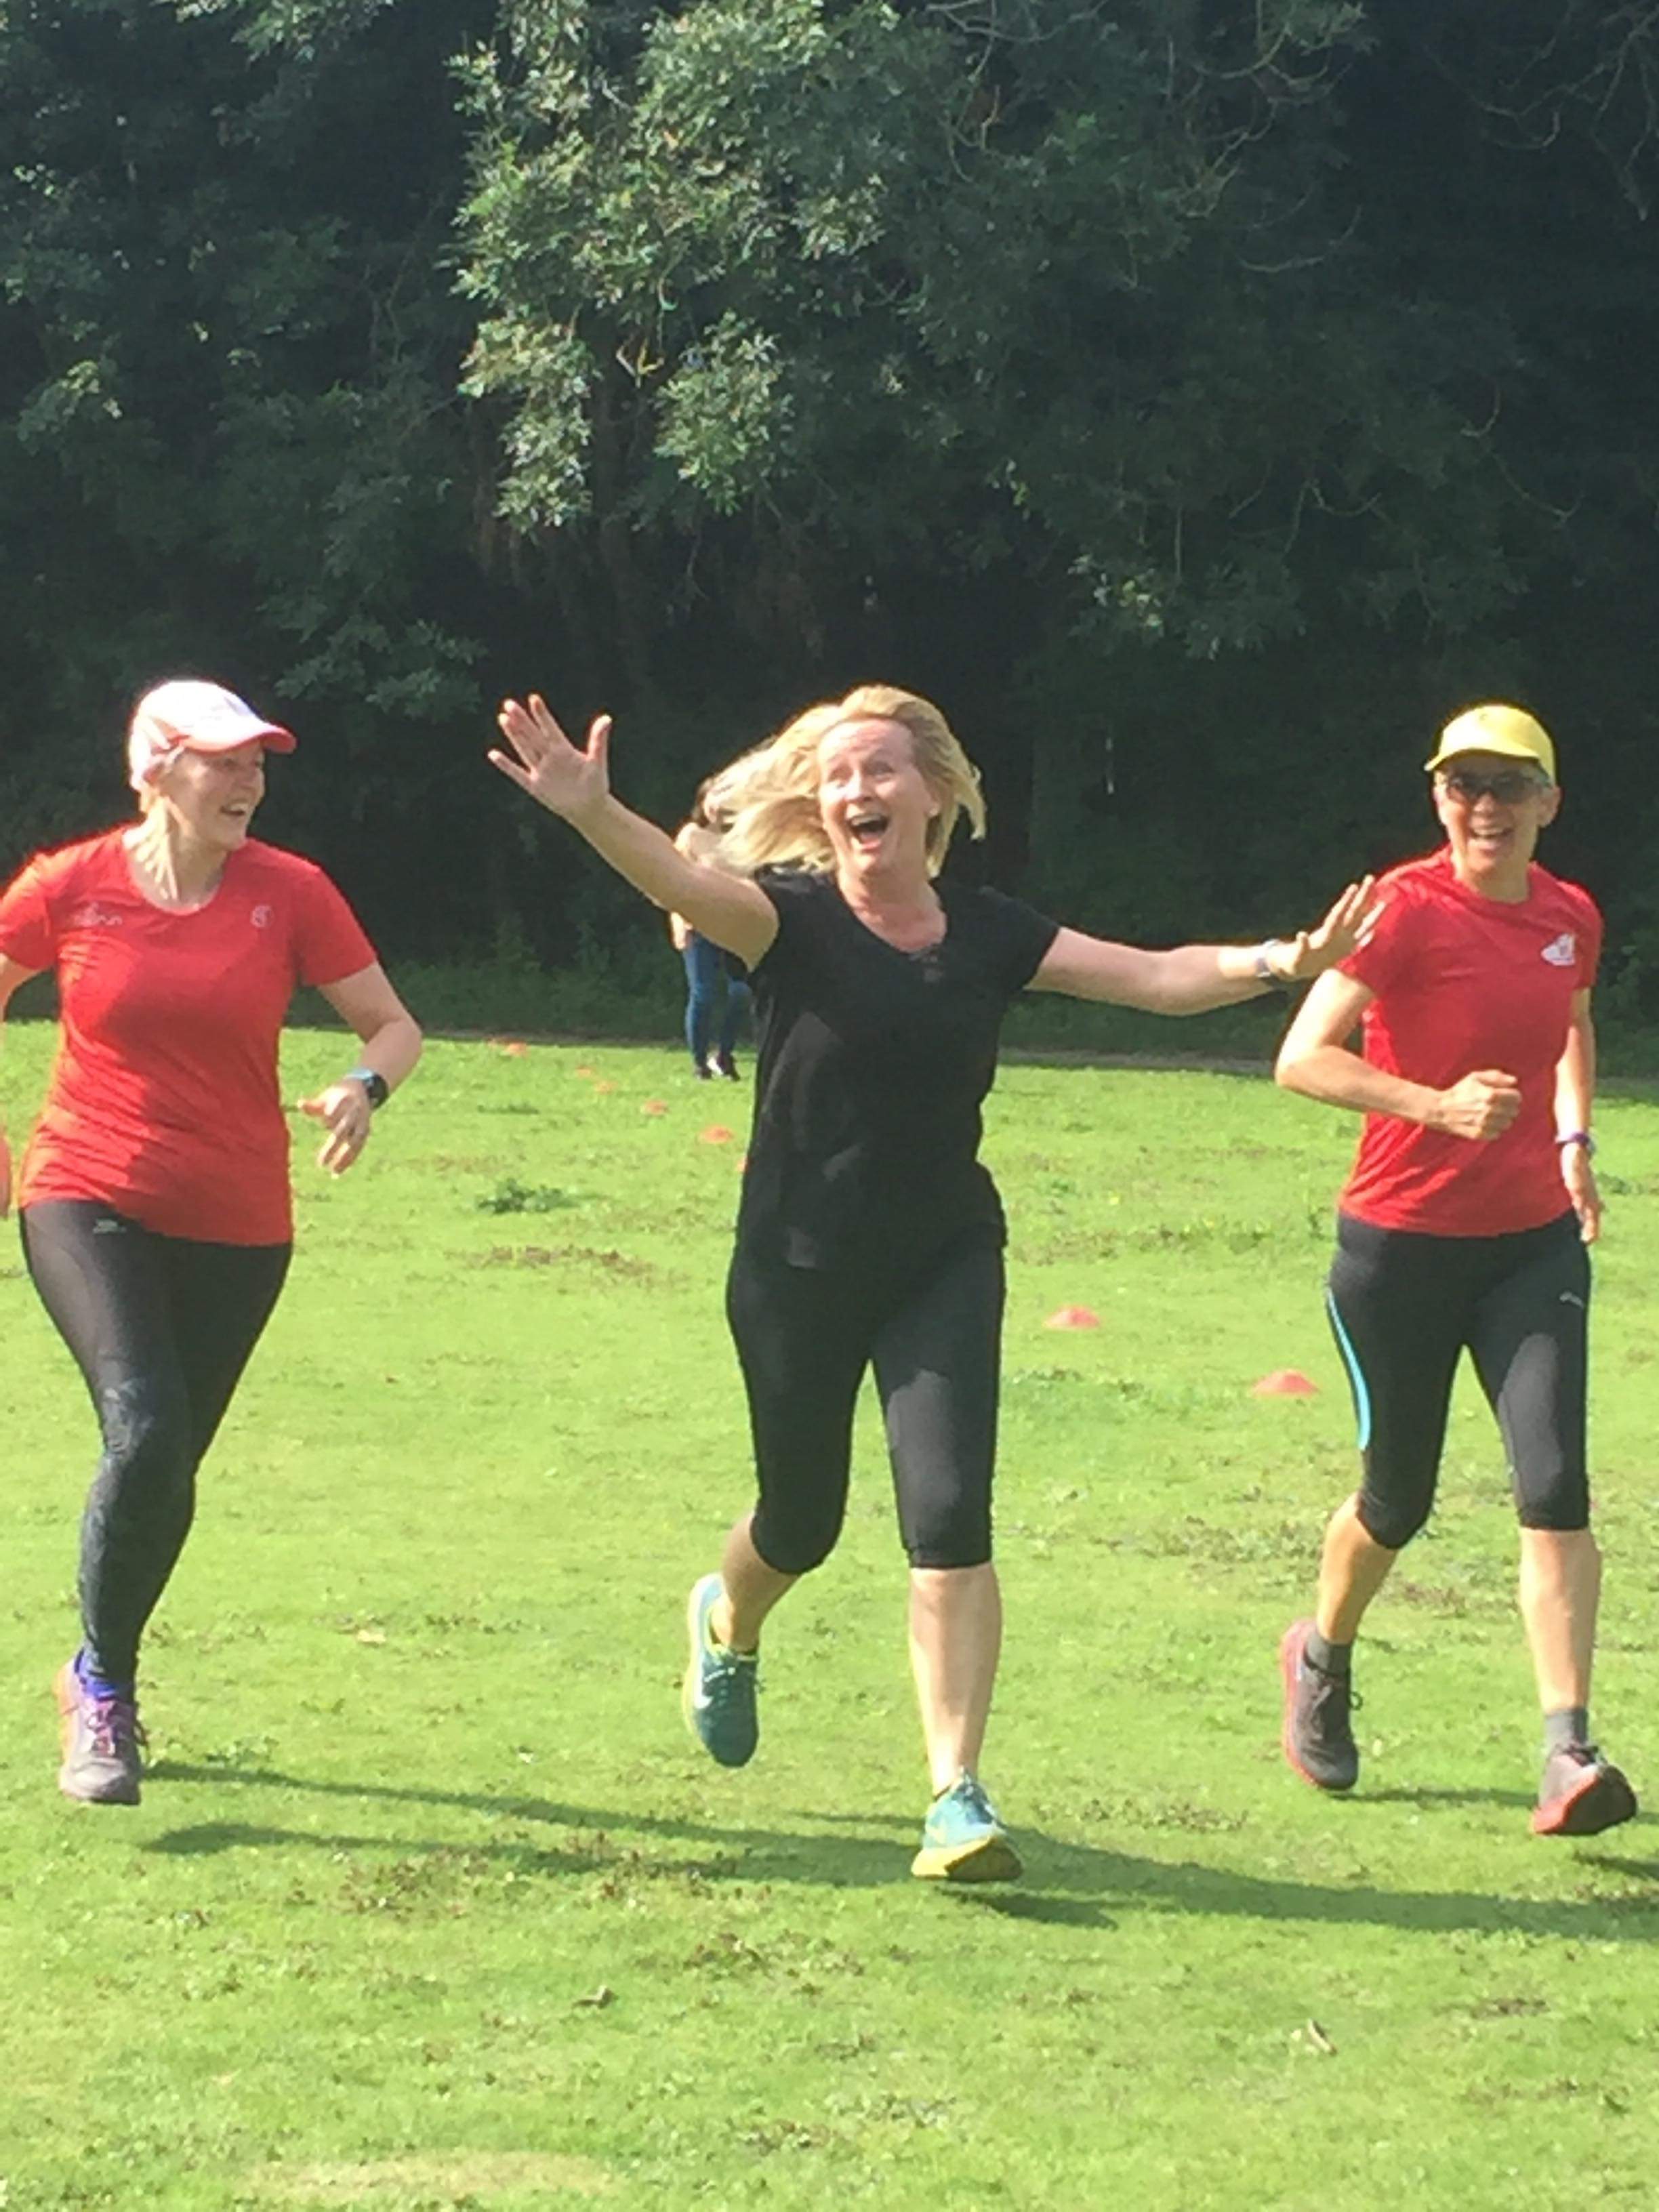 Terrie Bixby, Tracey Carruthers and Ann Holmes doing Parkrun together.